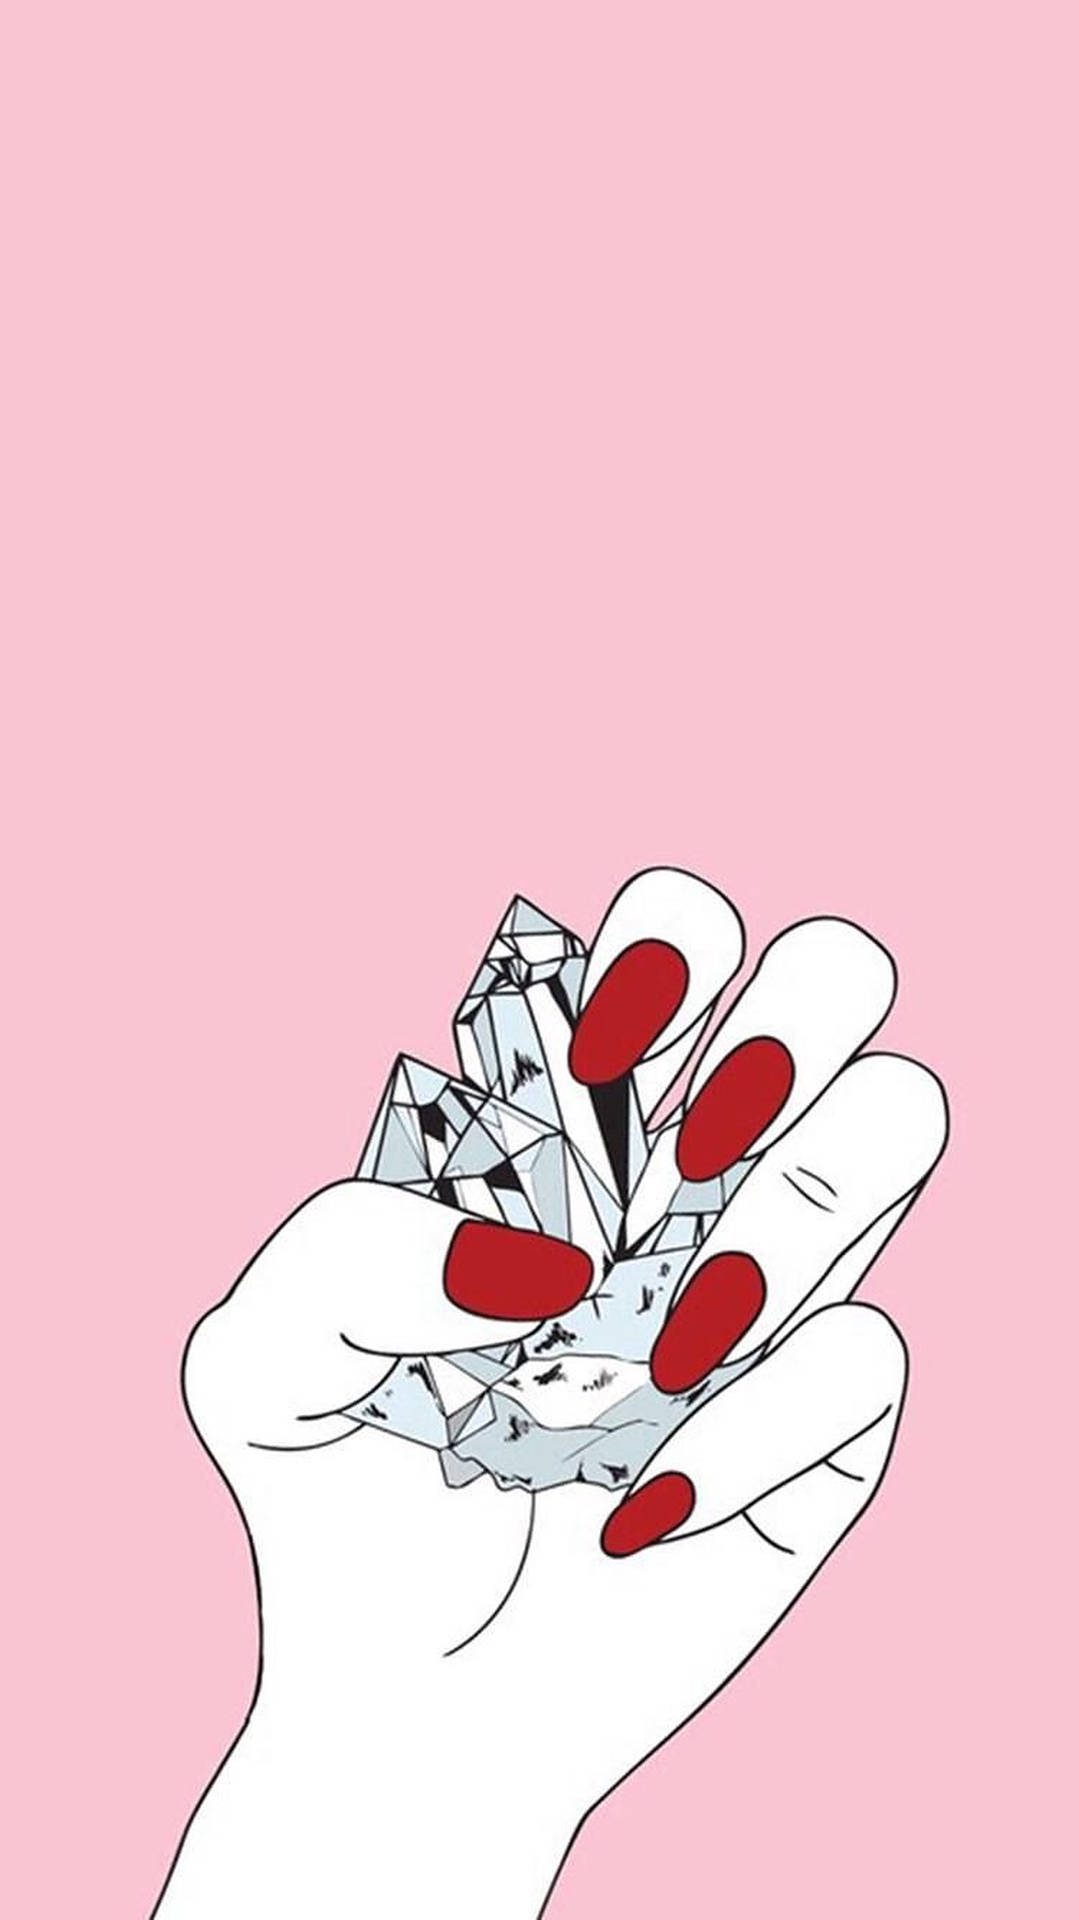 Red Nails Holding Crystal Wallpaper